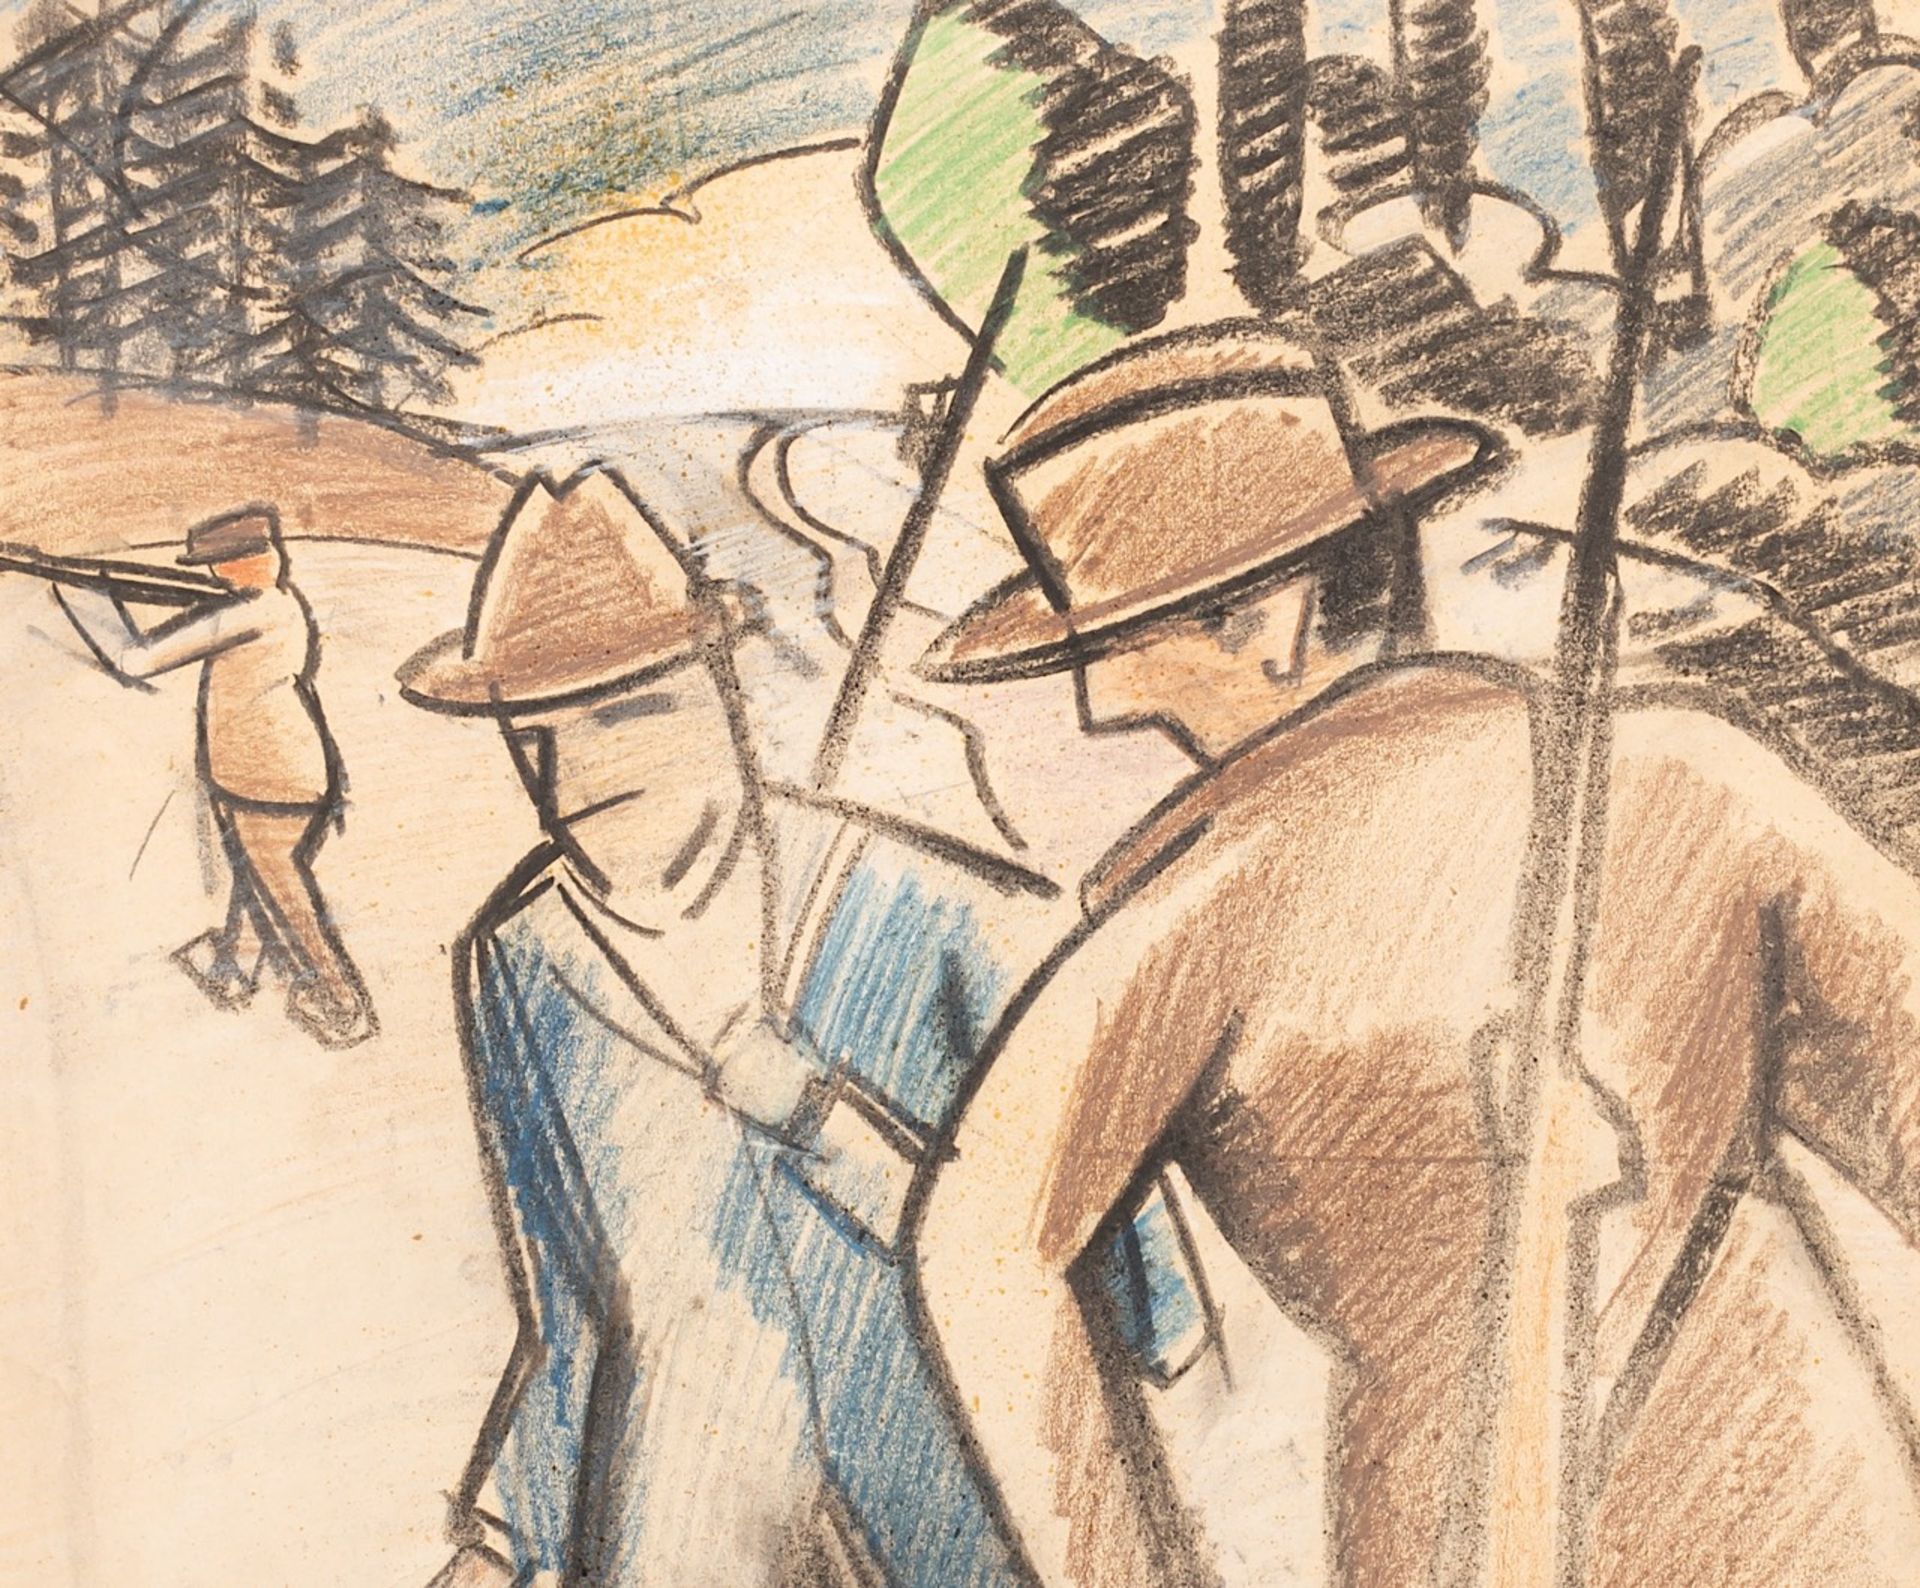 Jean Brusselmans (1884-1953), the hunters, 1925, pastel on paper, 55 x 75 cm - Image 5 of 6